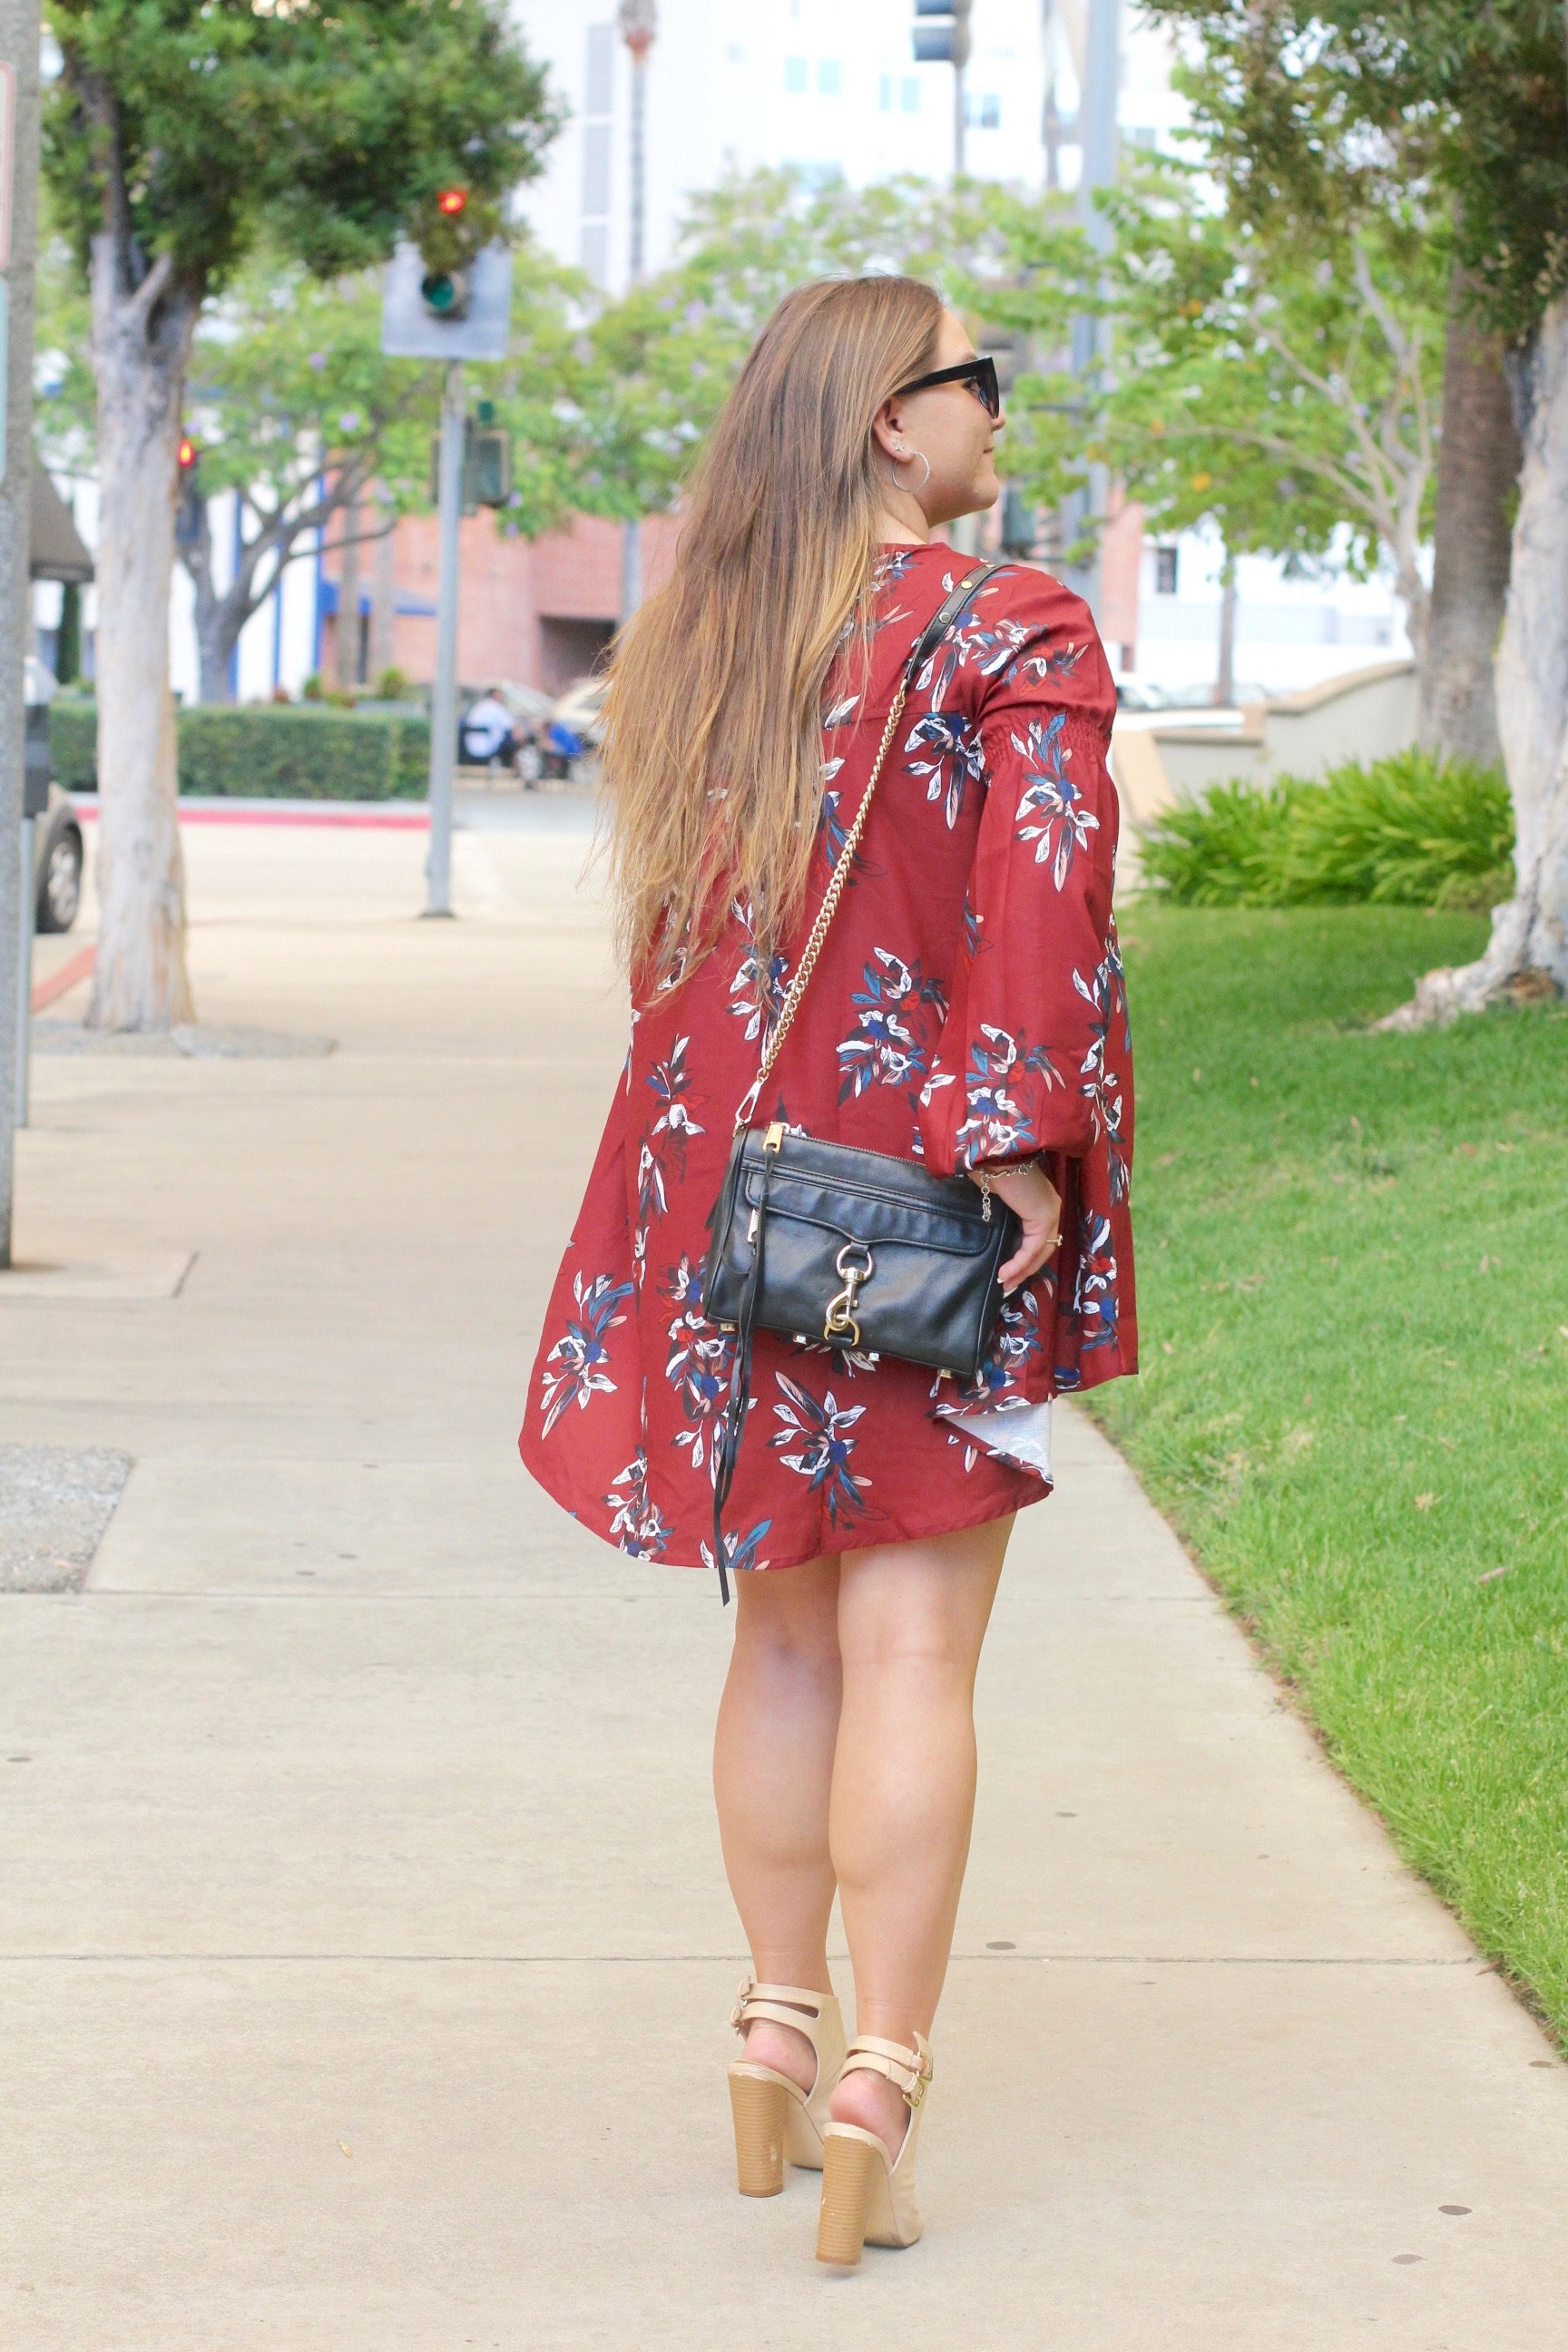 missyonmadison, melissa tierney, fashion blogger, fashion inspo, fall fashion, she in, she in dress, fall style, fall dress, go jane booties, rebecca minkoff, mini mac bag, rebecca minkoff mini mac bag, j crew sunglasses, outfit inspiration, street style, la blogger, floral dress, oxblood dress,